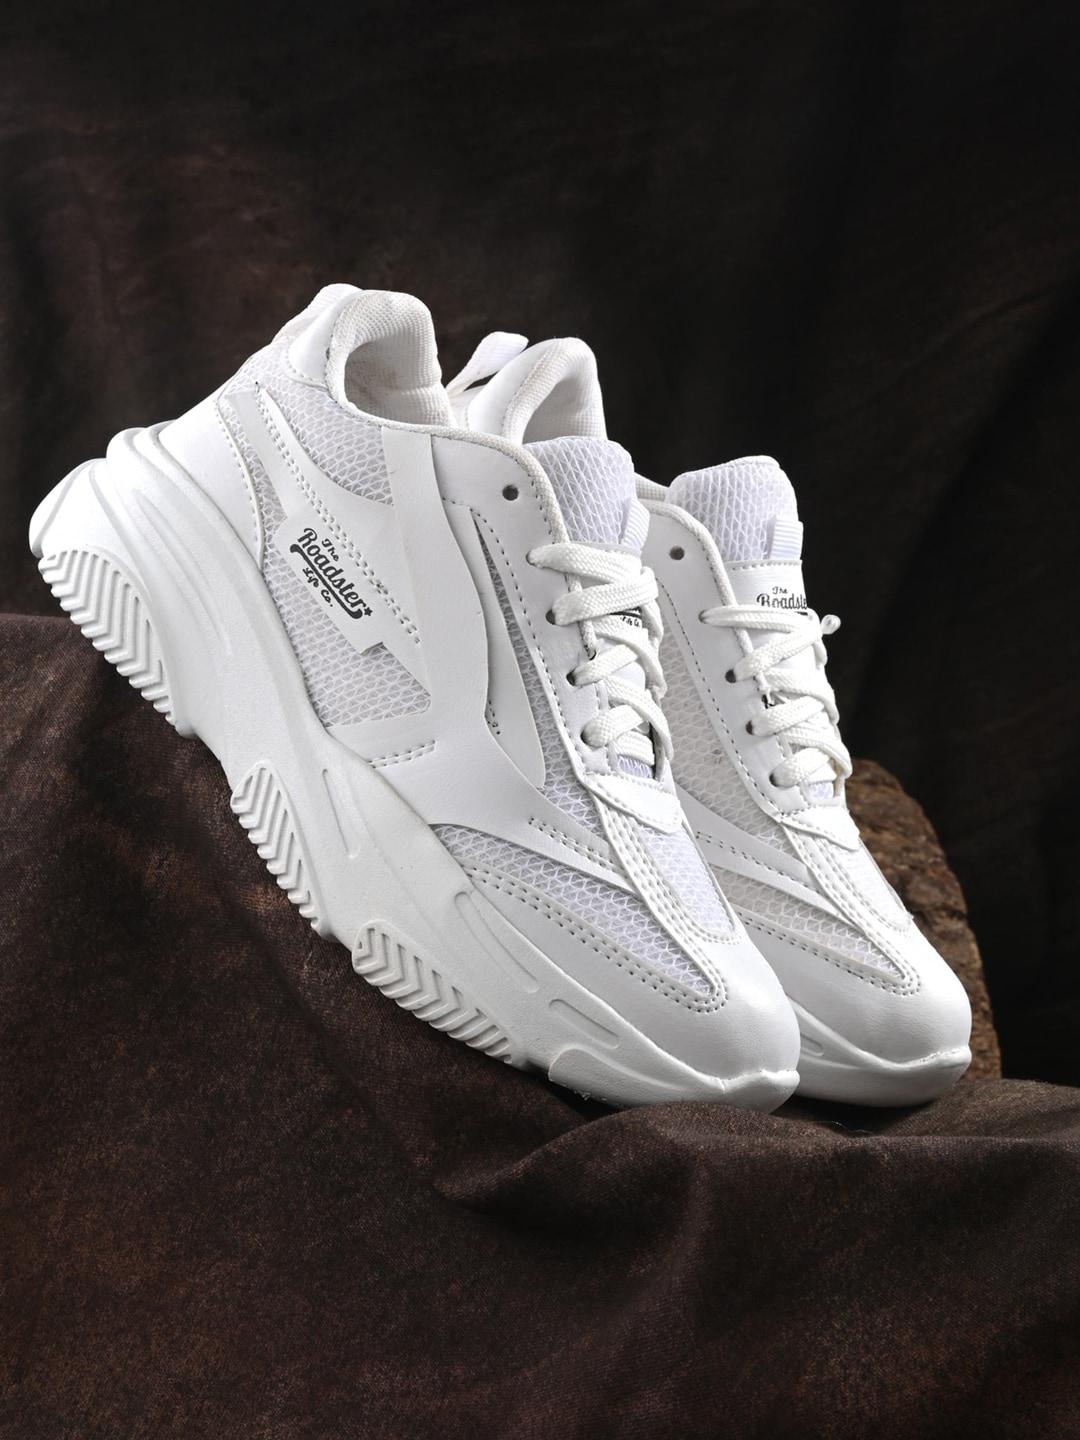 the-roadster-lifestyle-co.-women-white-woven-design-padded-insole-mesh-basics-sneakers